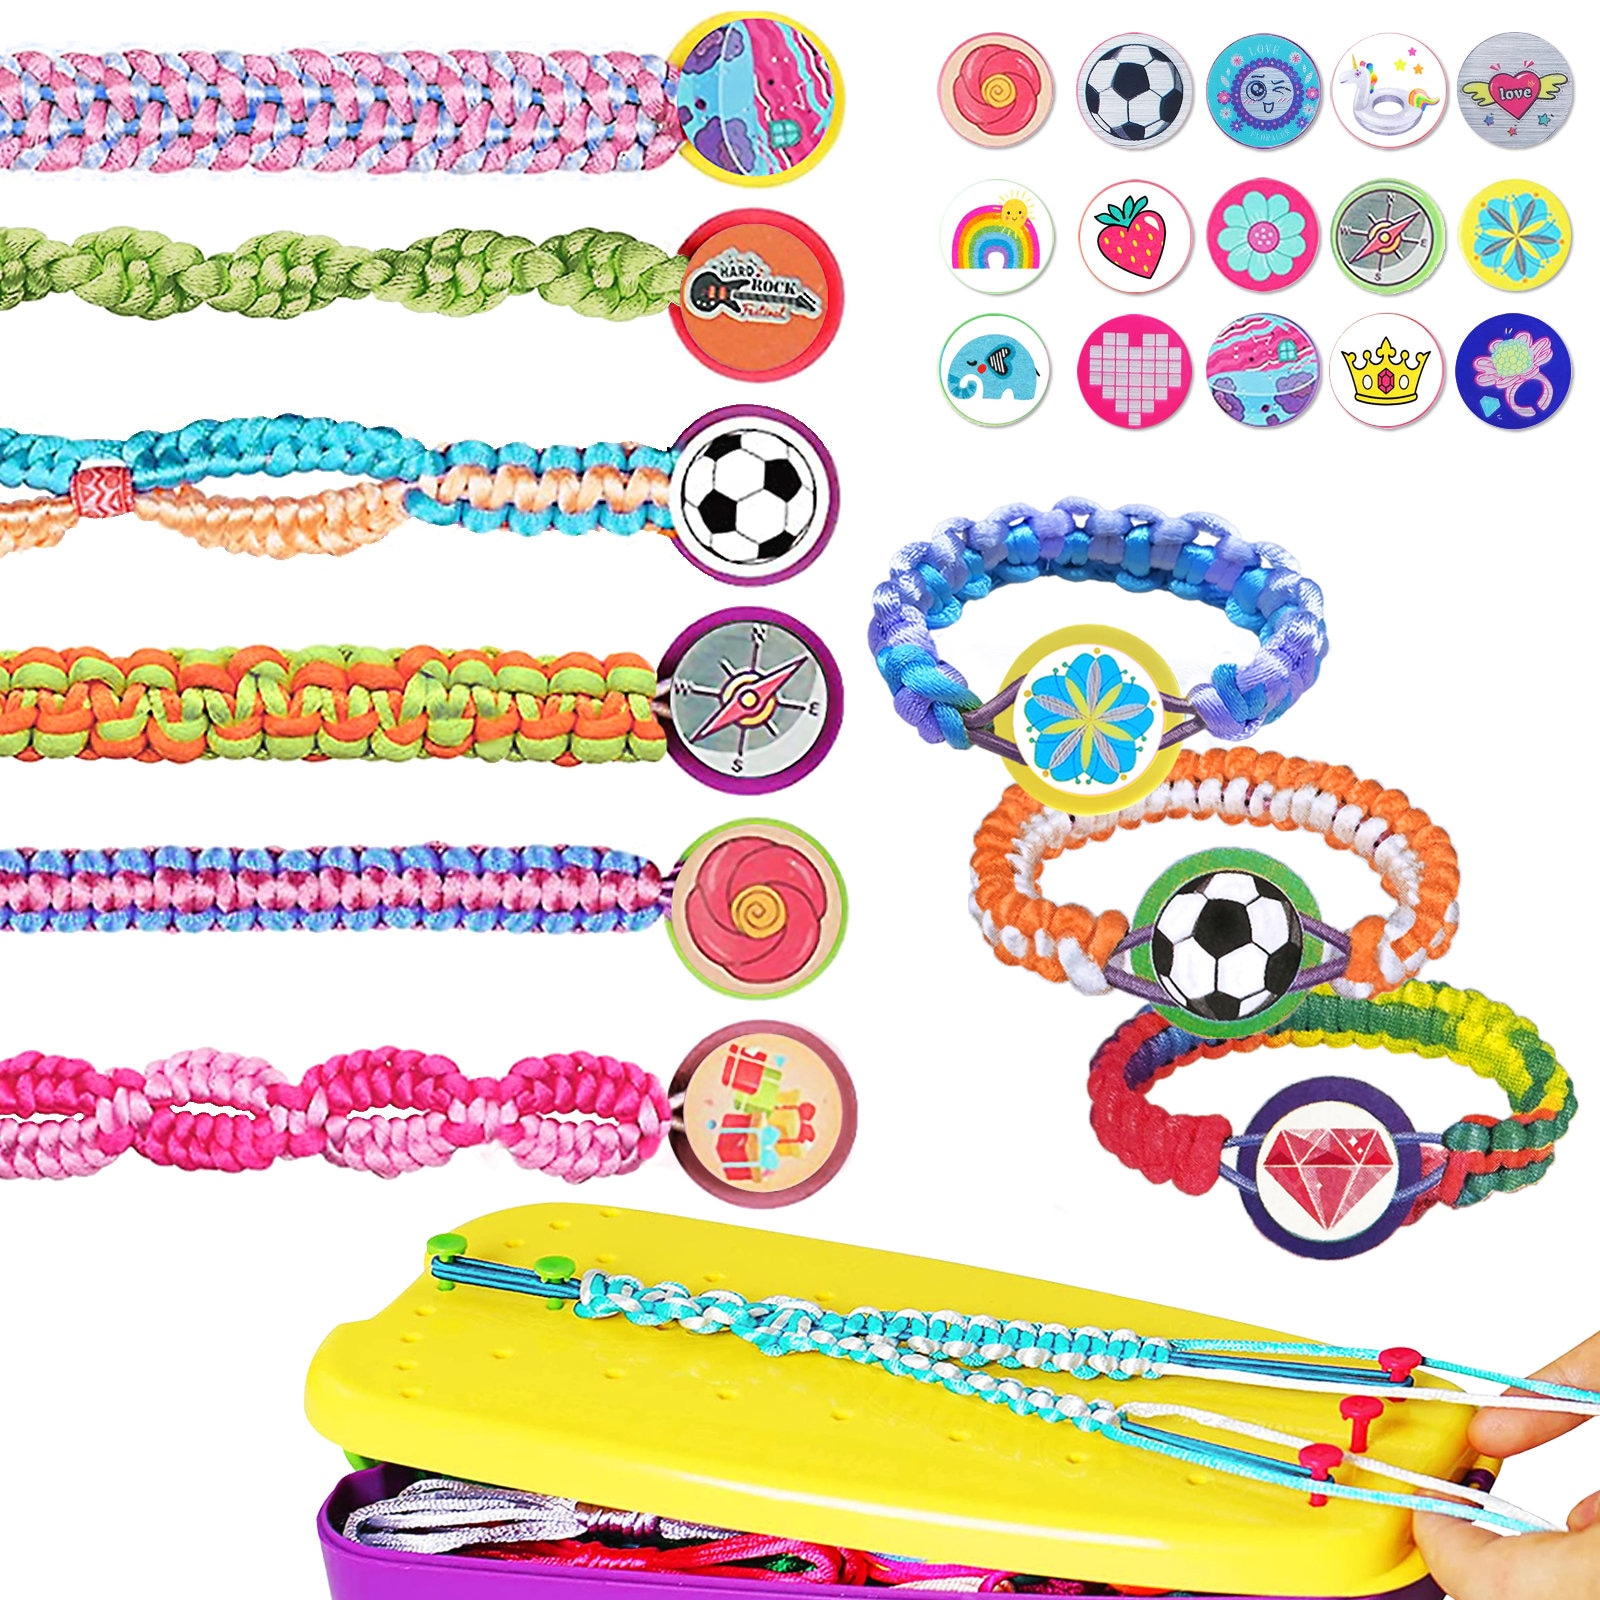 Friendship Bracelet Making Kit Toys, Ages 6 7 8 9 10 11 12 Year Old Girls  Gifts Ideas 